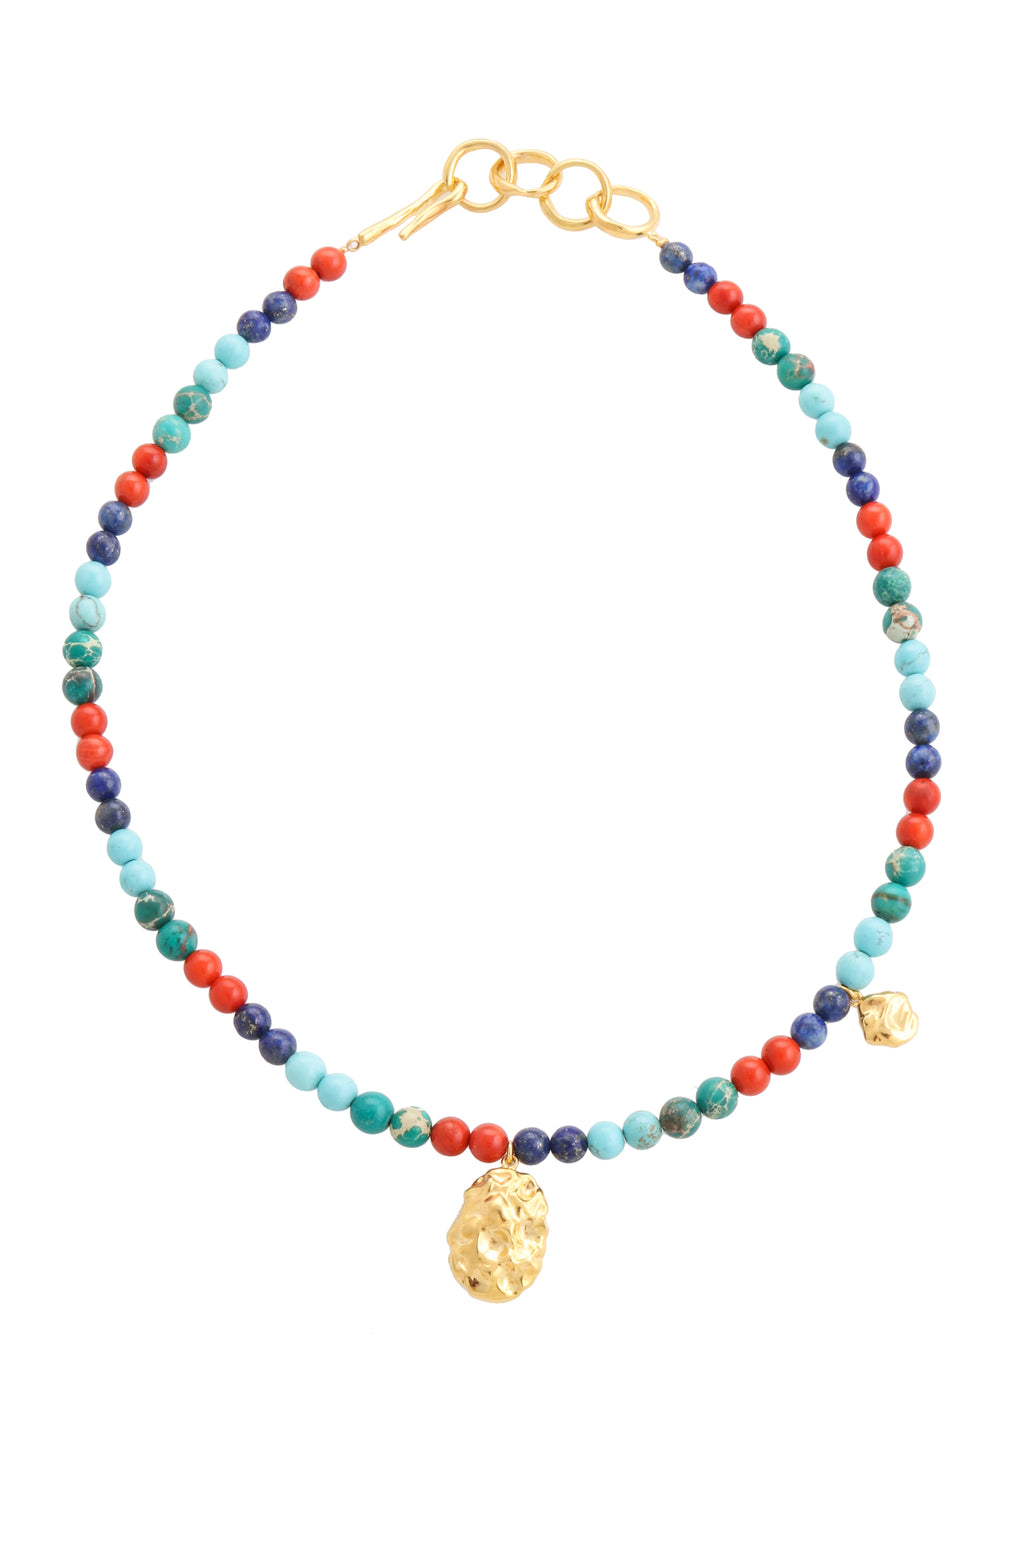 MULTICOLORED BEADS NECKLACE WITH WAVE PENDANT